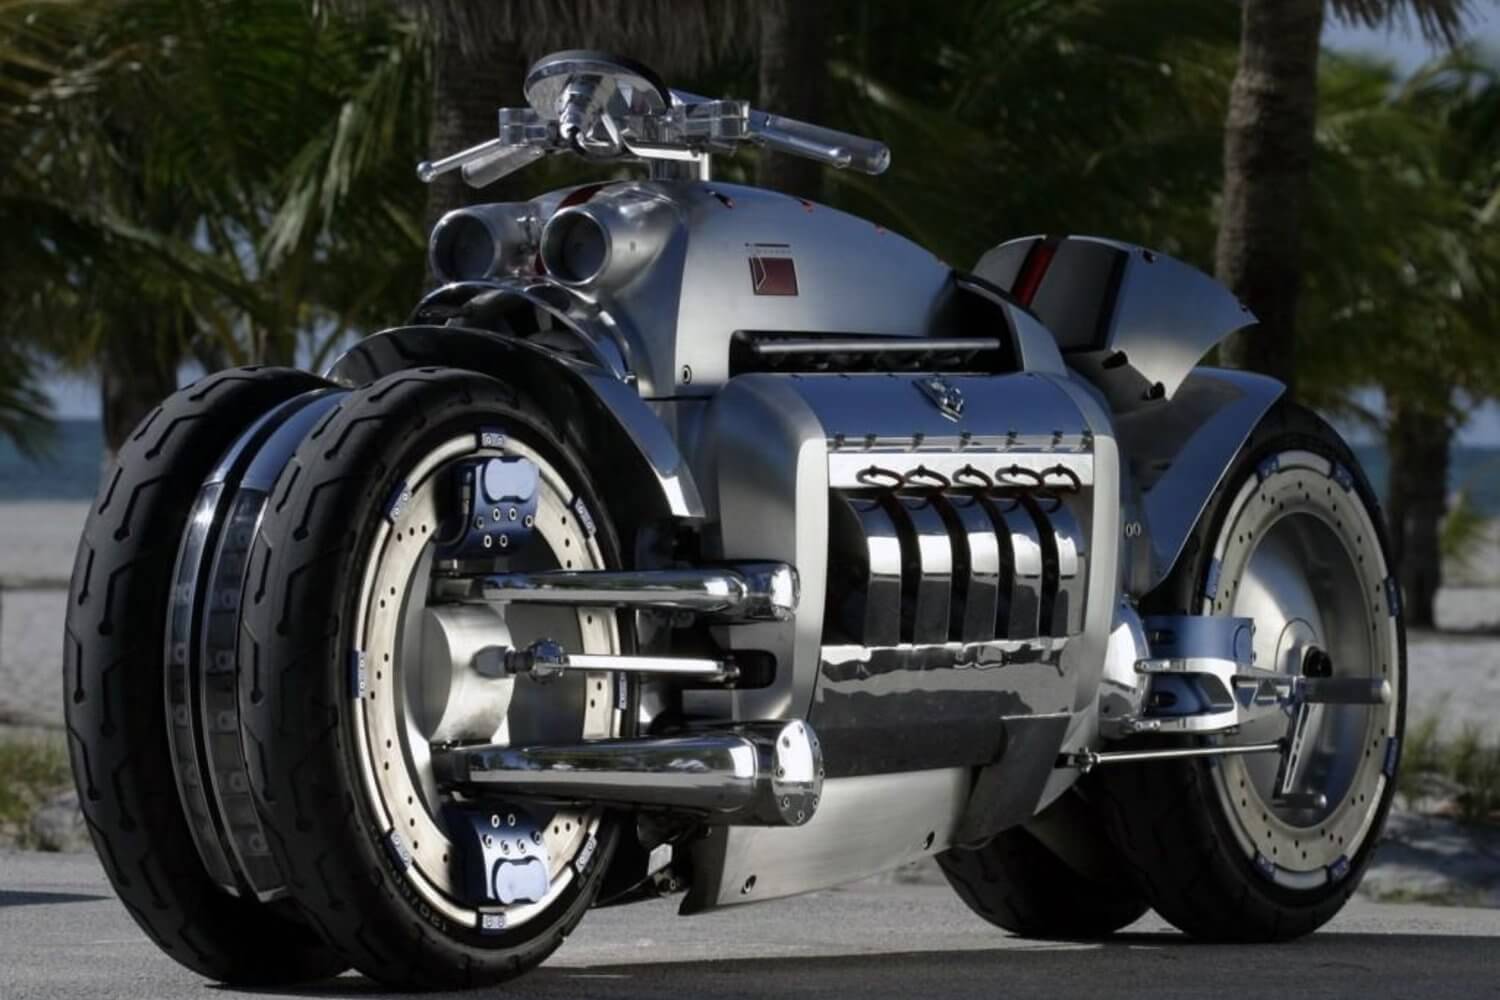 luxurious motorcycles